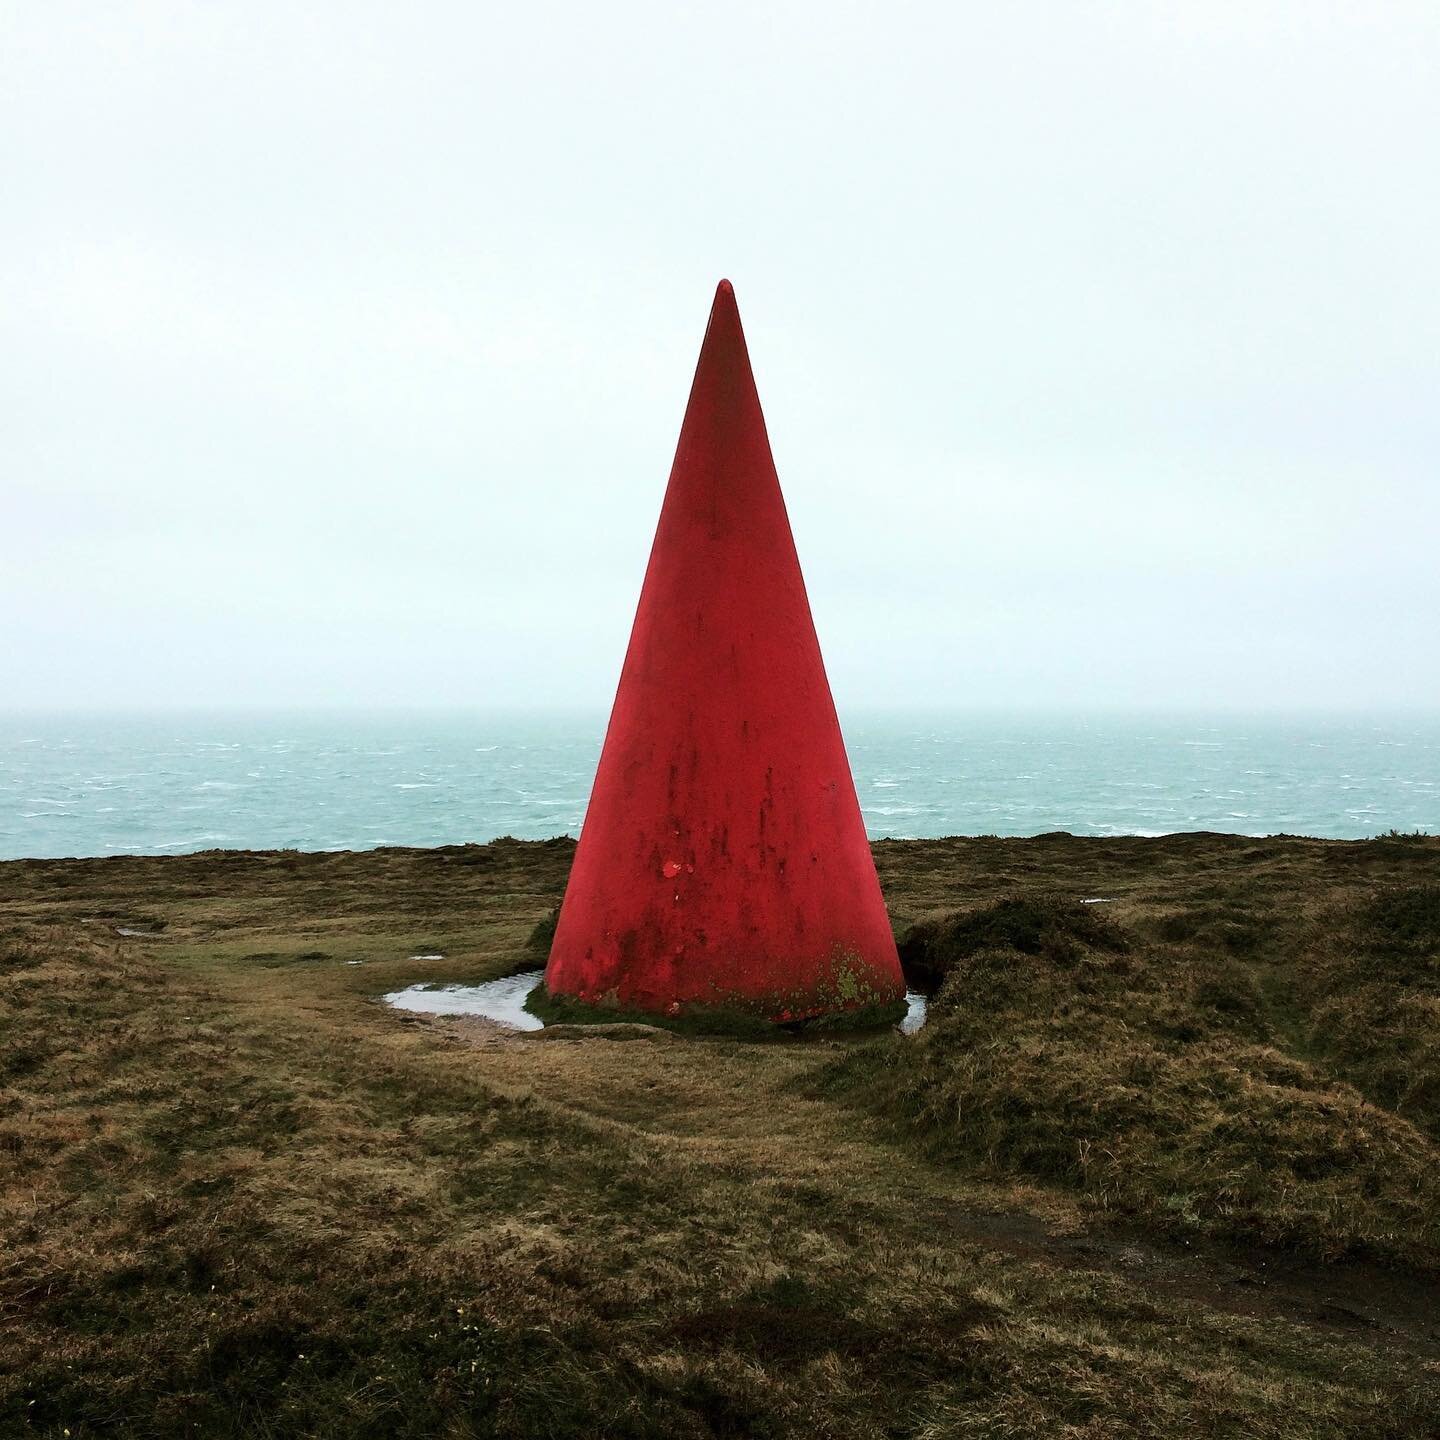 Daymarks at Gwennap taken on a grey day, providing inspiration for a beautiful project in wildest west Cornwall